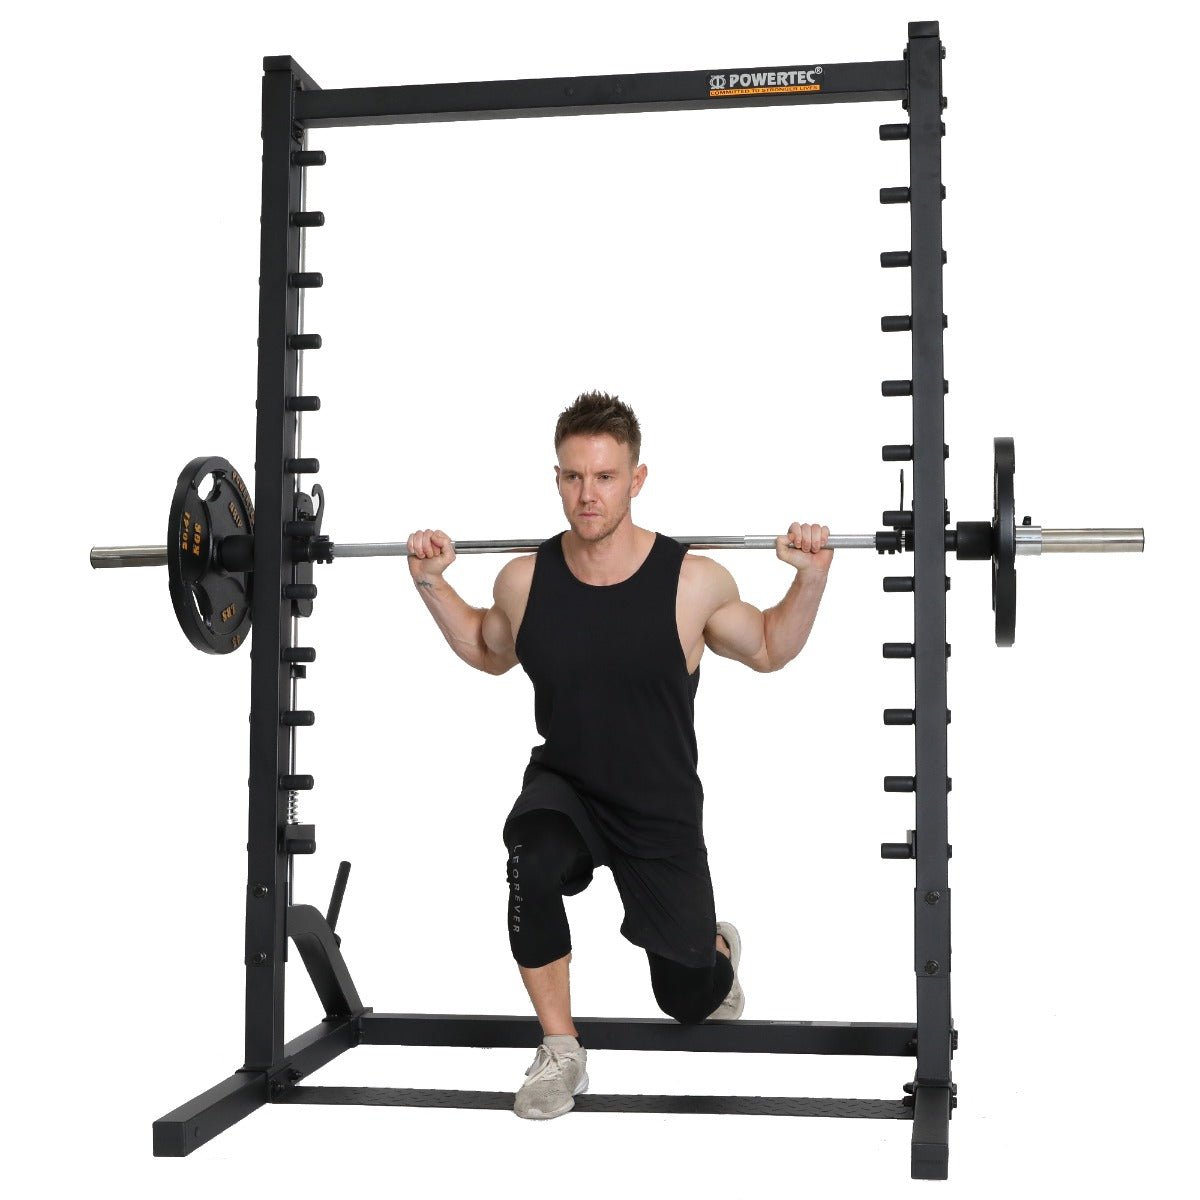 Image of Rob Riches using the Powertec Smith Machine.